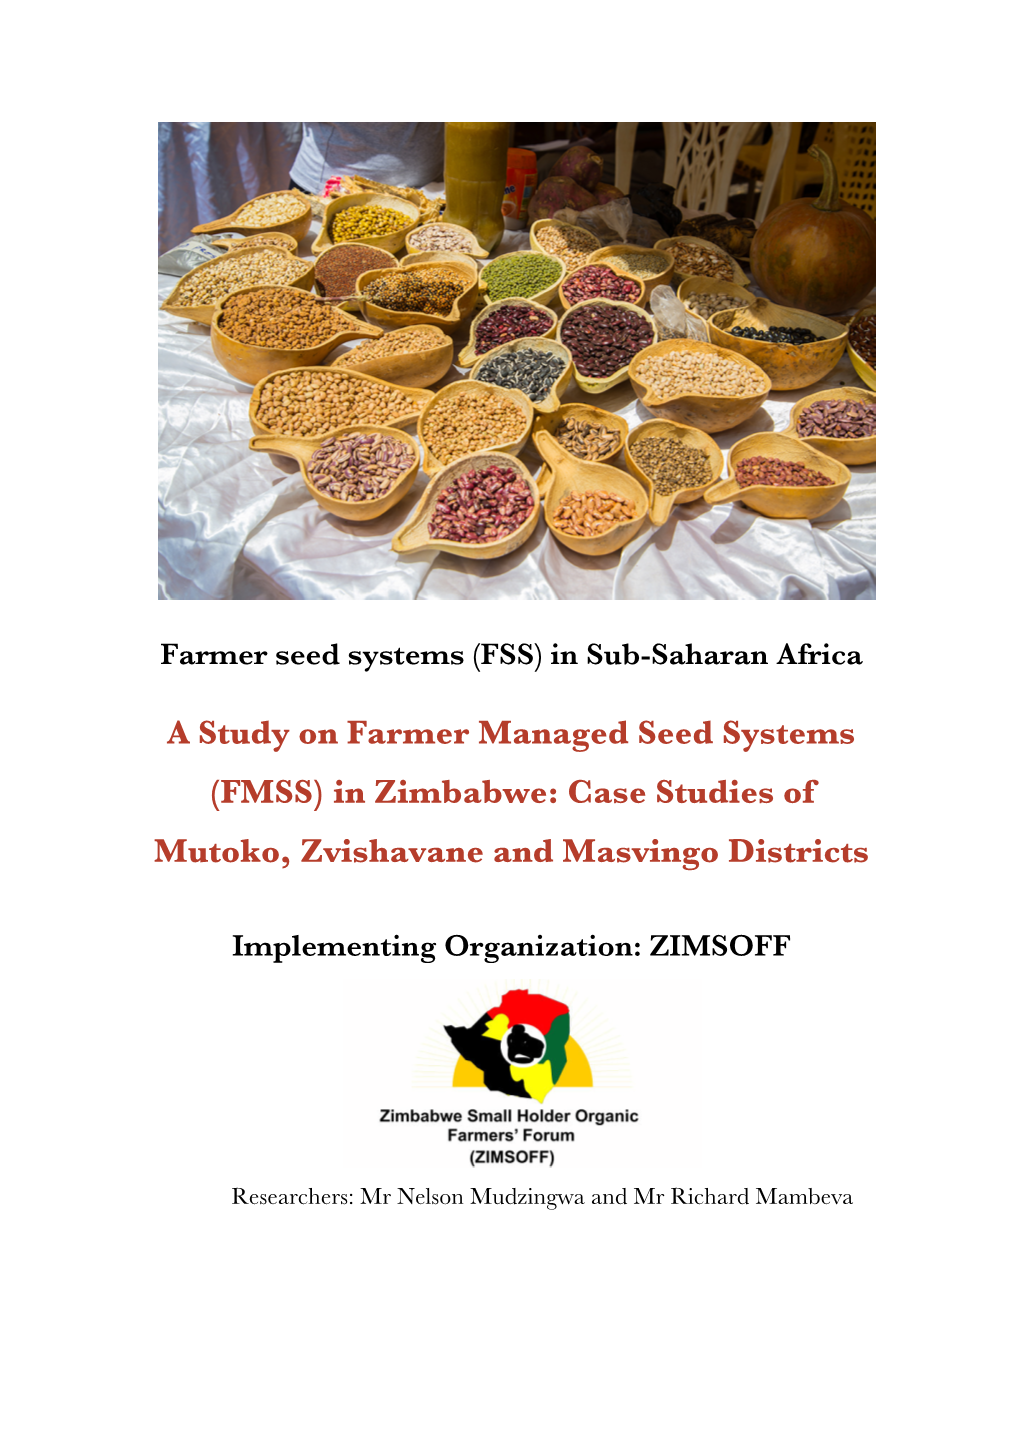 A Study on Farmer Managed Seed Systems (FMSS) in Zimbabwe: Case Studies of Mutoko, Zvishavane and Masvingo Districts